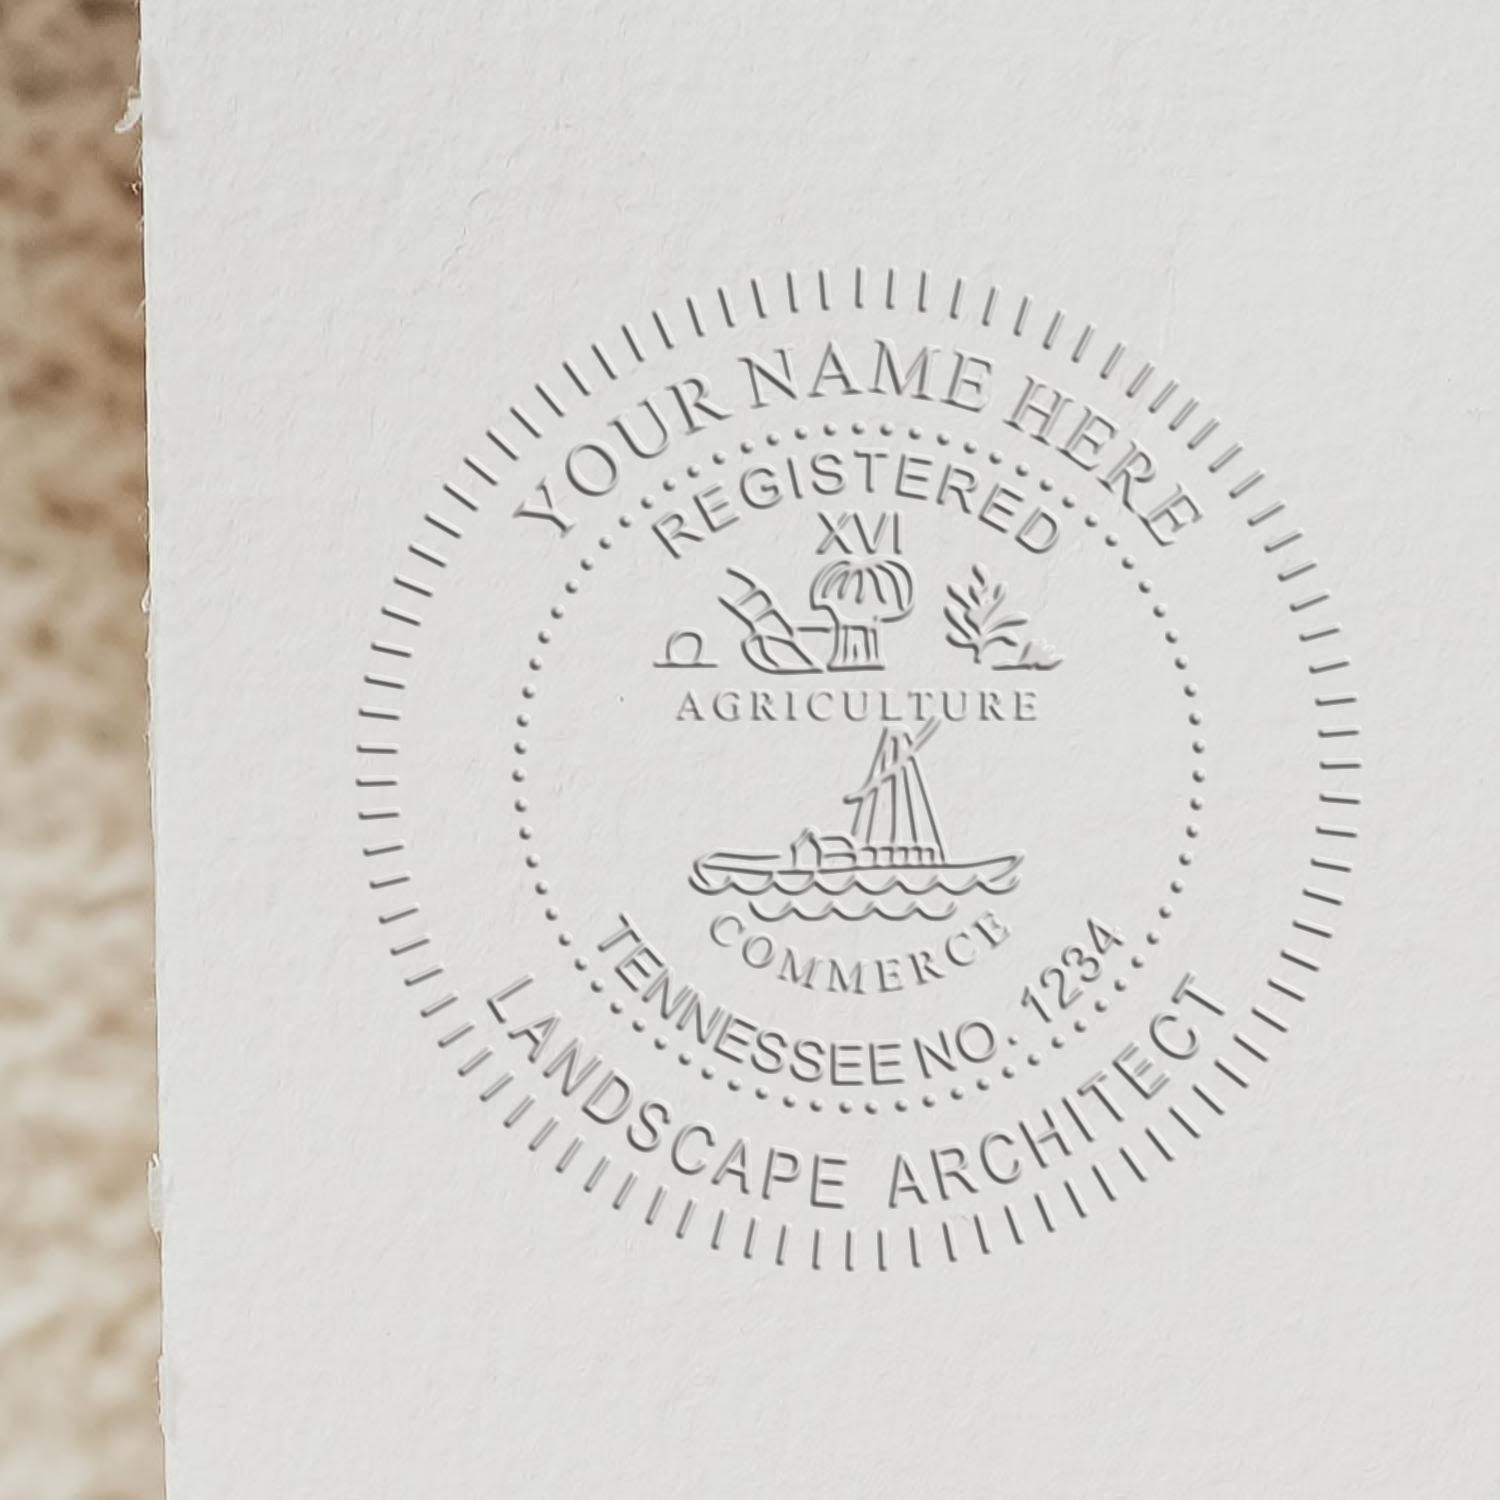 The Tennessee Desk Landscape Architectural Seal Embosser stamp impression comes to life with a crisp, detailed photo on paper - showcasing true professional quality.